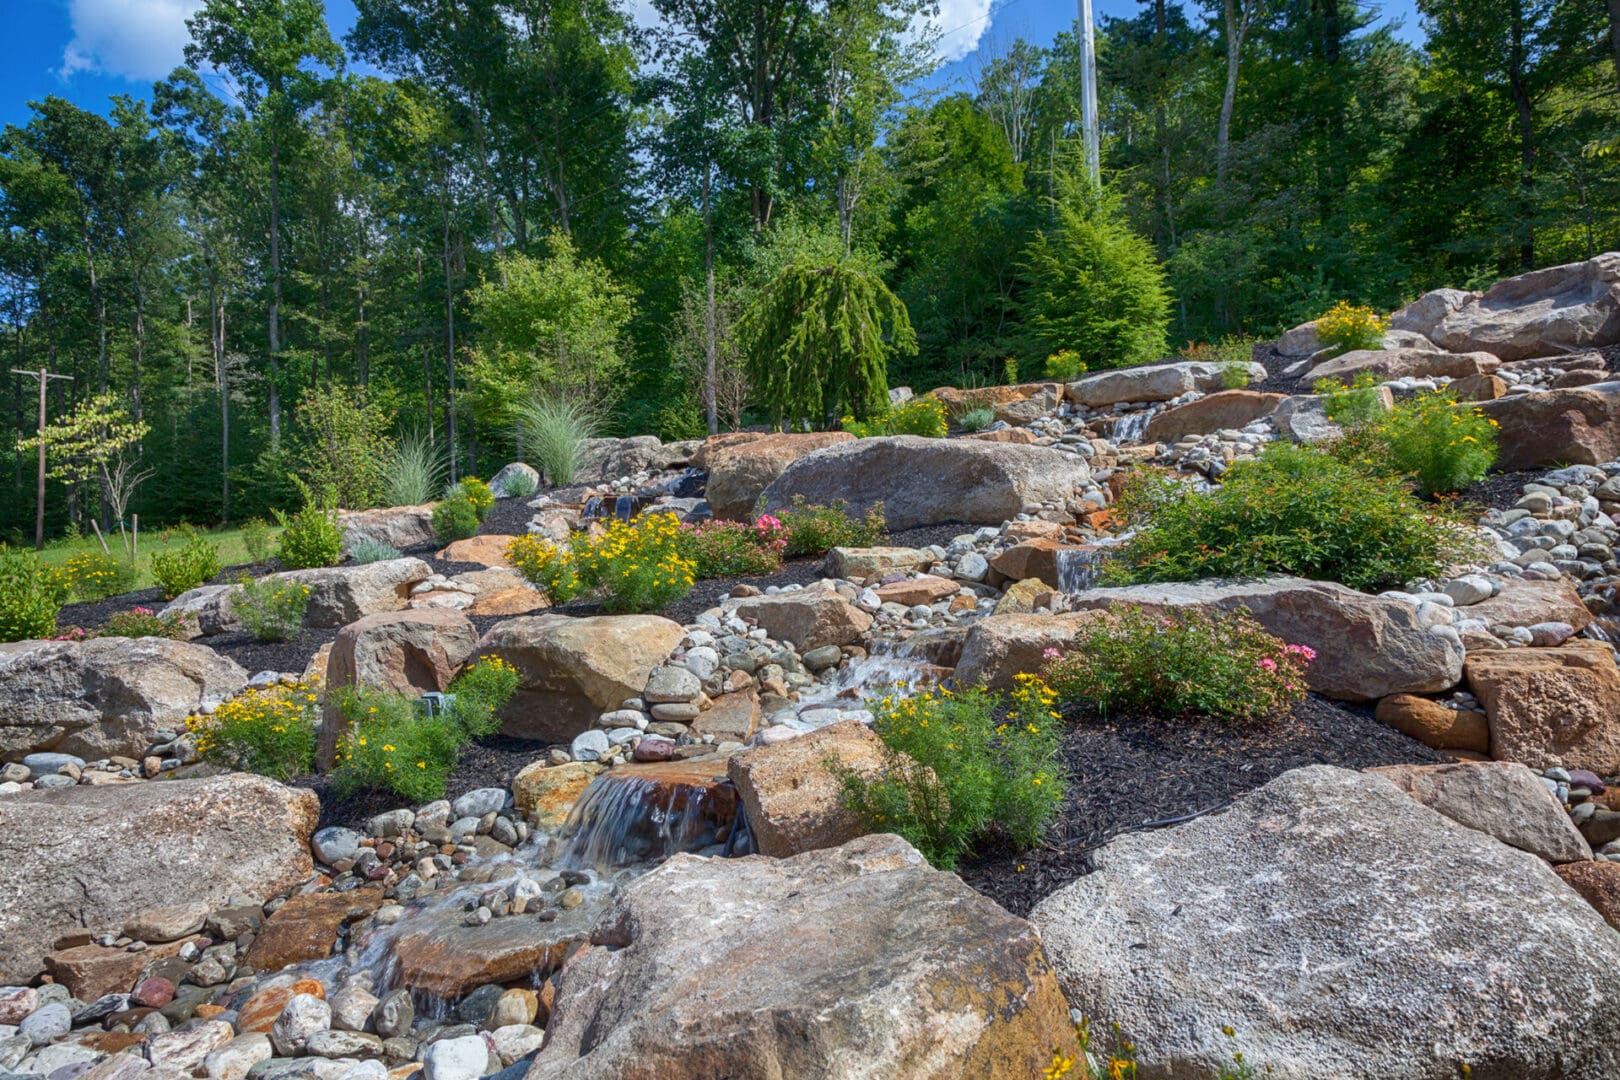 A serene rock garden surrounded by trees and shrubs, enhanced with subtle water features